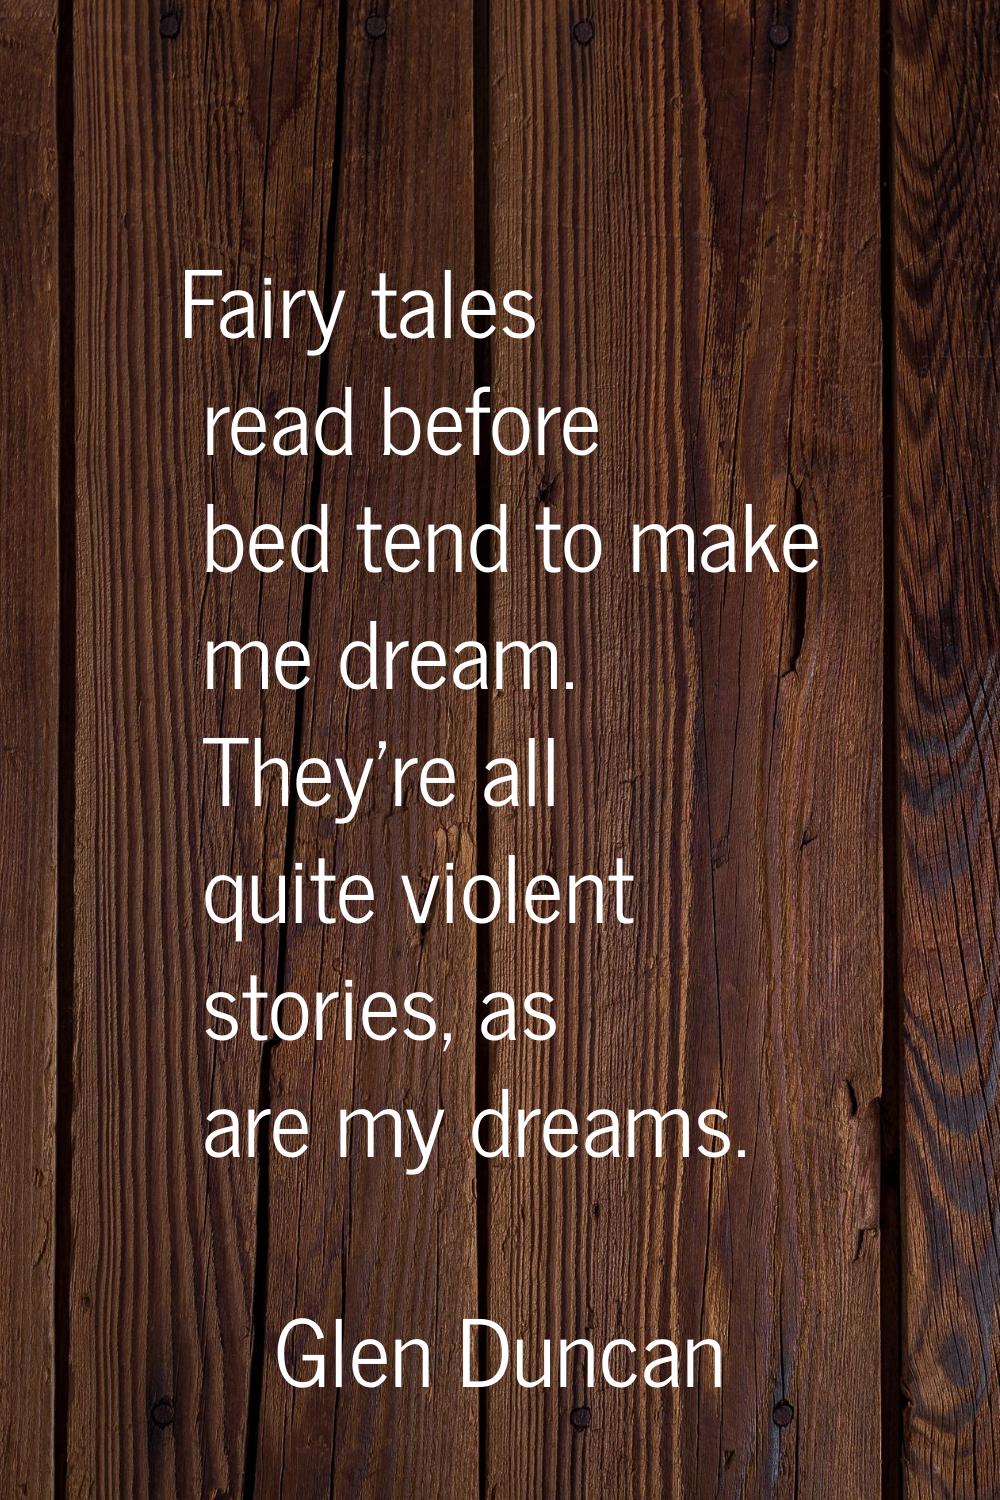 Fairy tales read before bed tend to make me dream. They're all quite violent stories, as are my dre